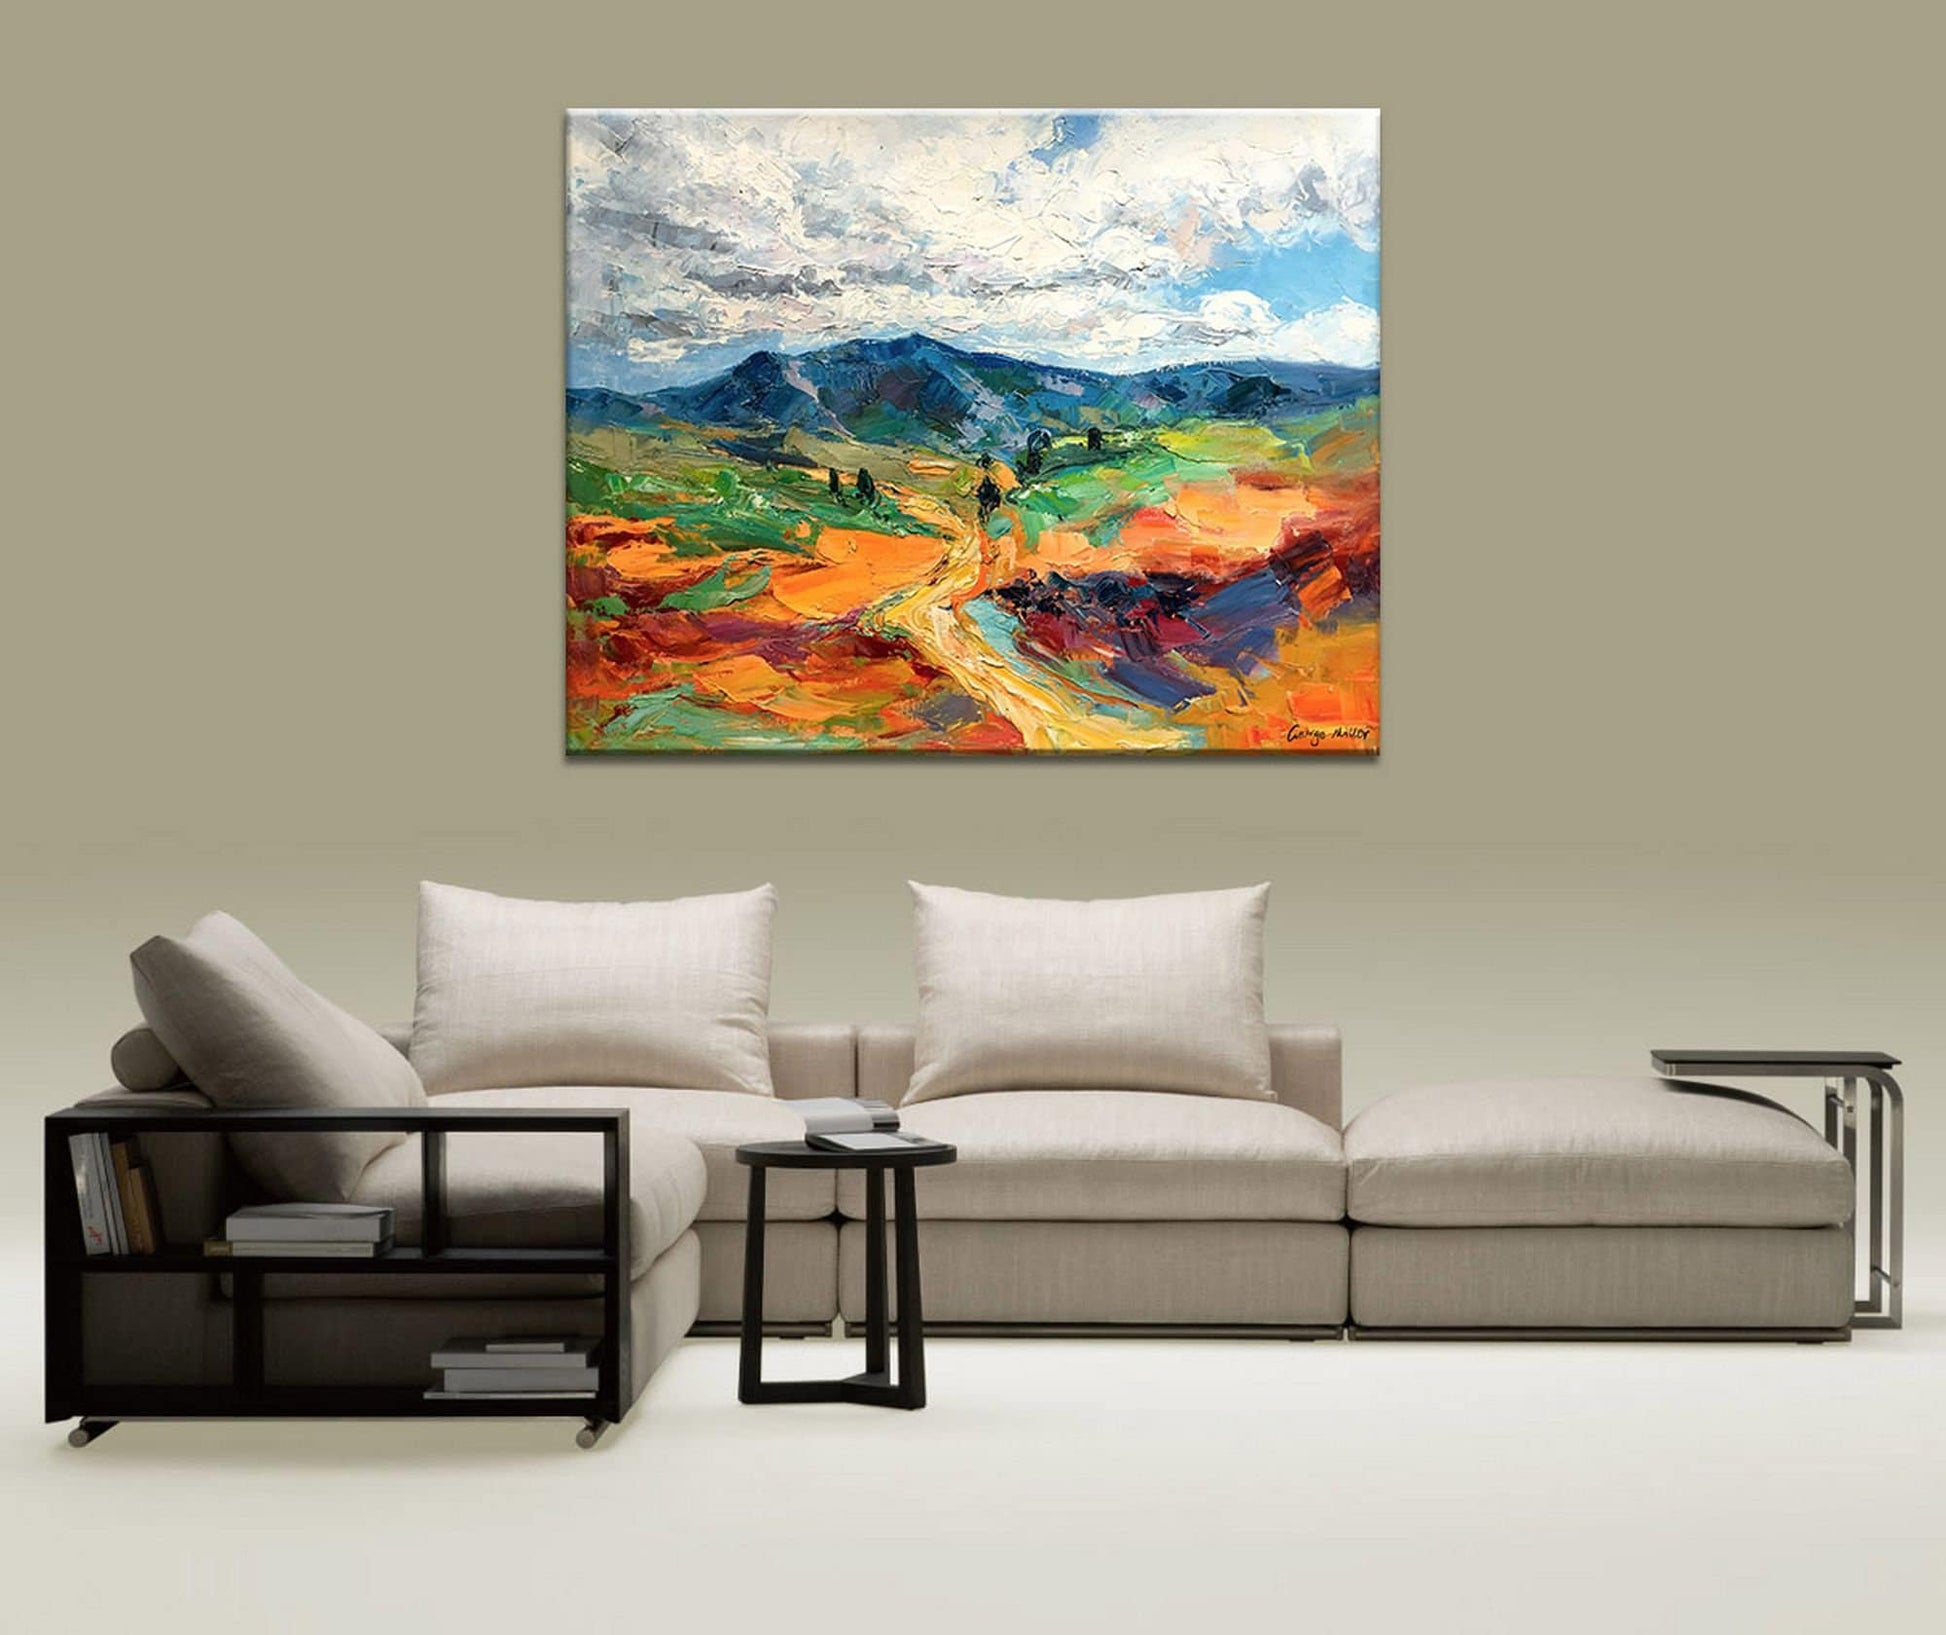 Abstract Painting Landscape with Mountains, Oil Painting, Abstract Canvas Art, Wall Decor, Abstract Wall Art, Bedroom Decor